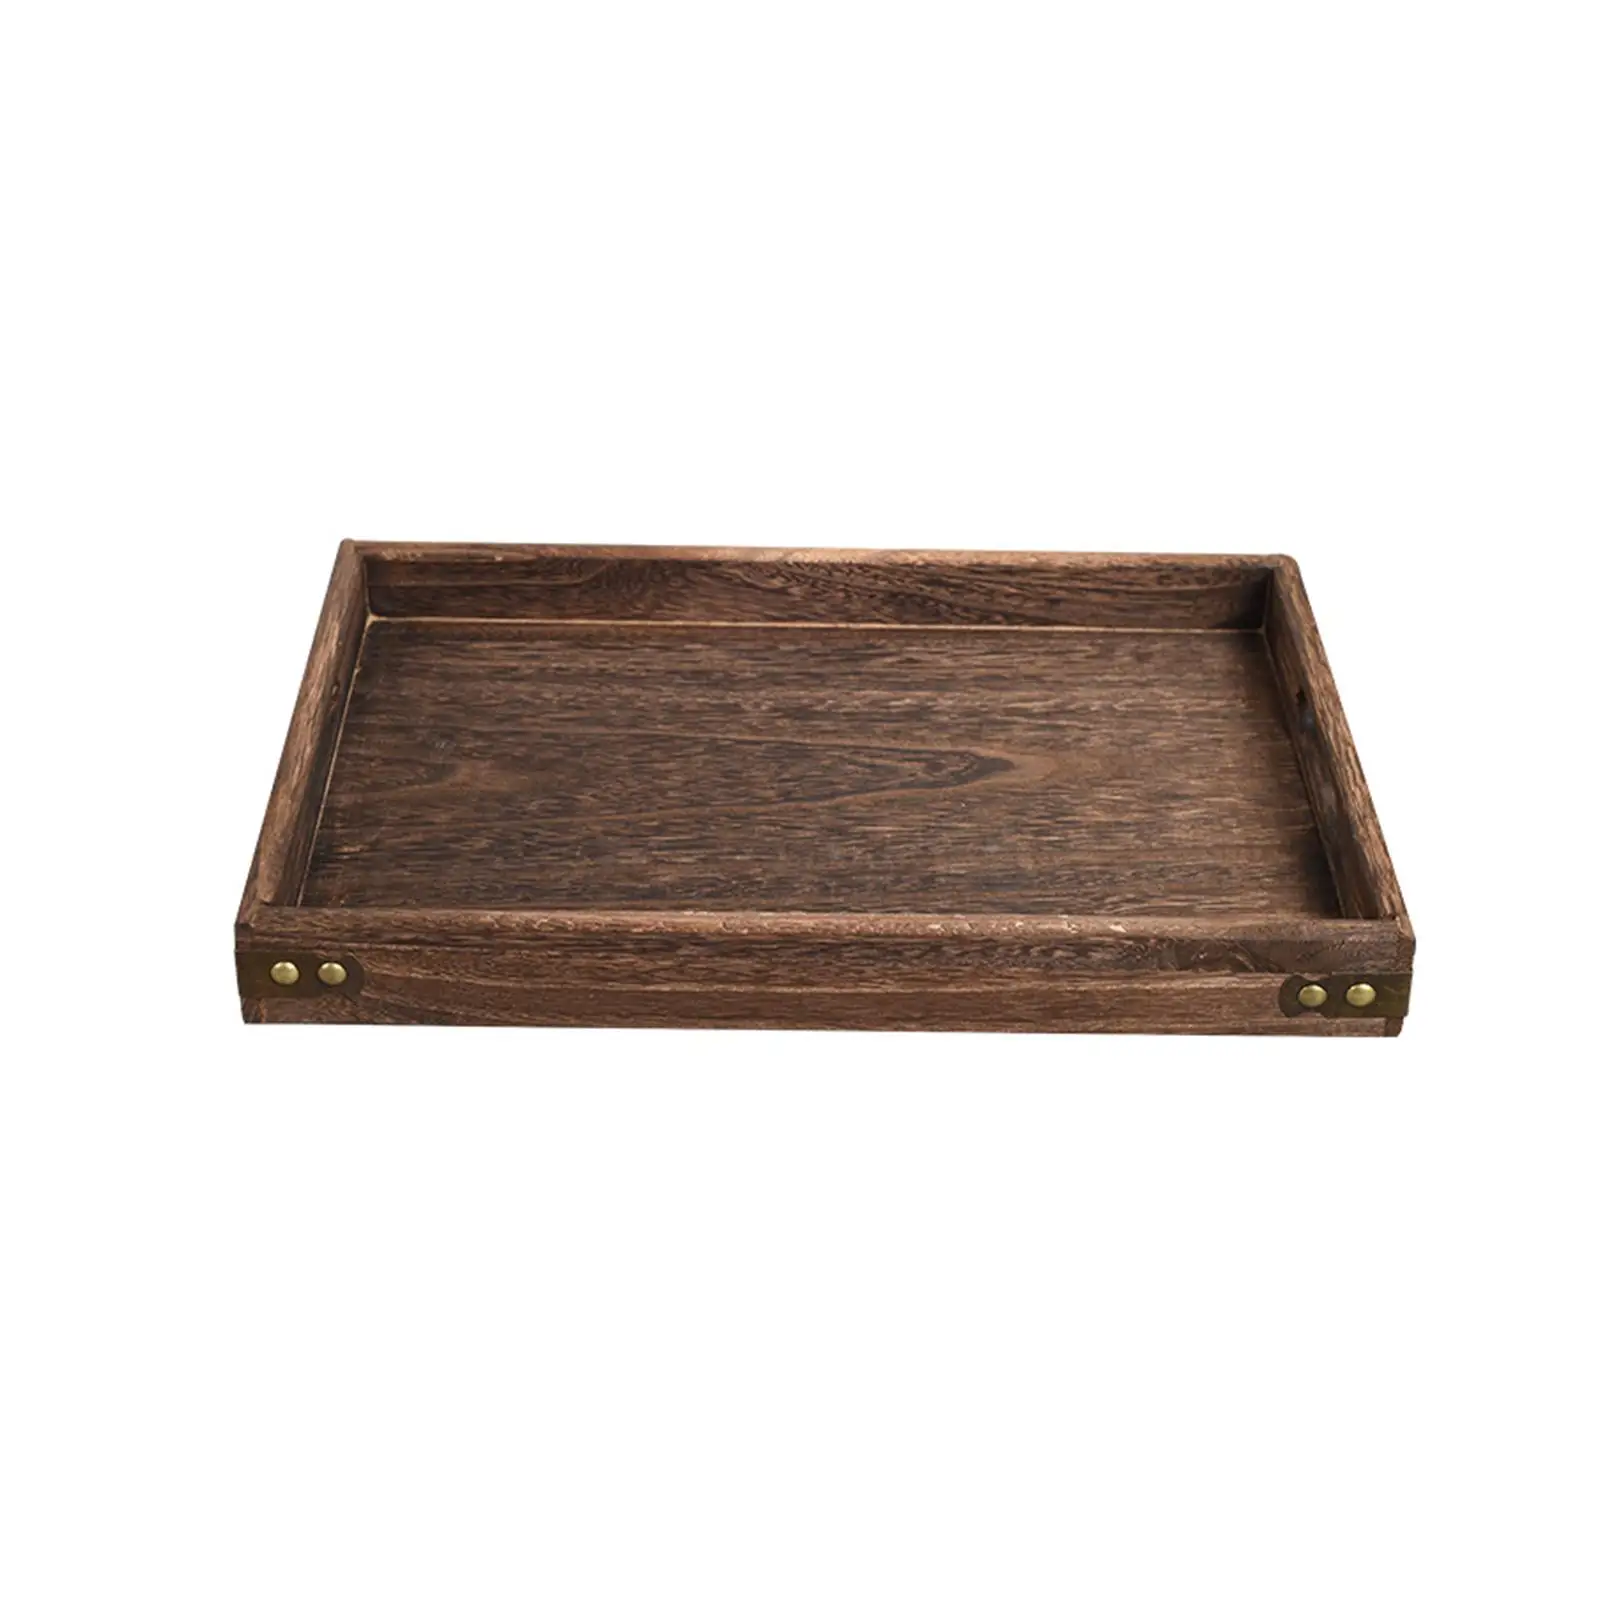 Rustic Wood Serving Tray Platter Rectangular Eating Tray for Appetizers Snacks Convenient Multifunctional Coffee